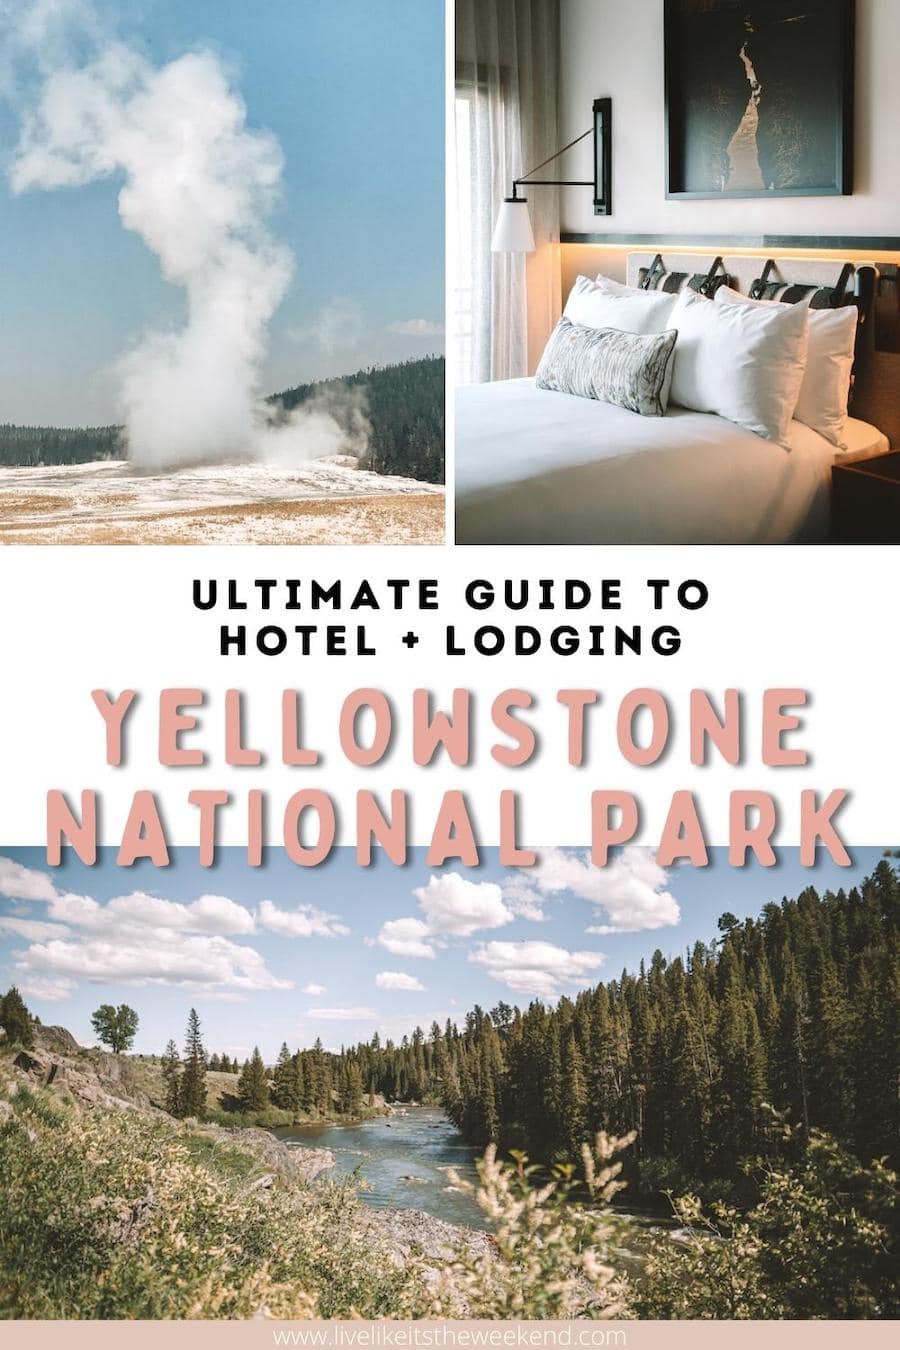 https://www.livelikeitstheweekend.com/wp-content/uploads/2022/07/where-to-stay-in-yellowstone-1.jpg